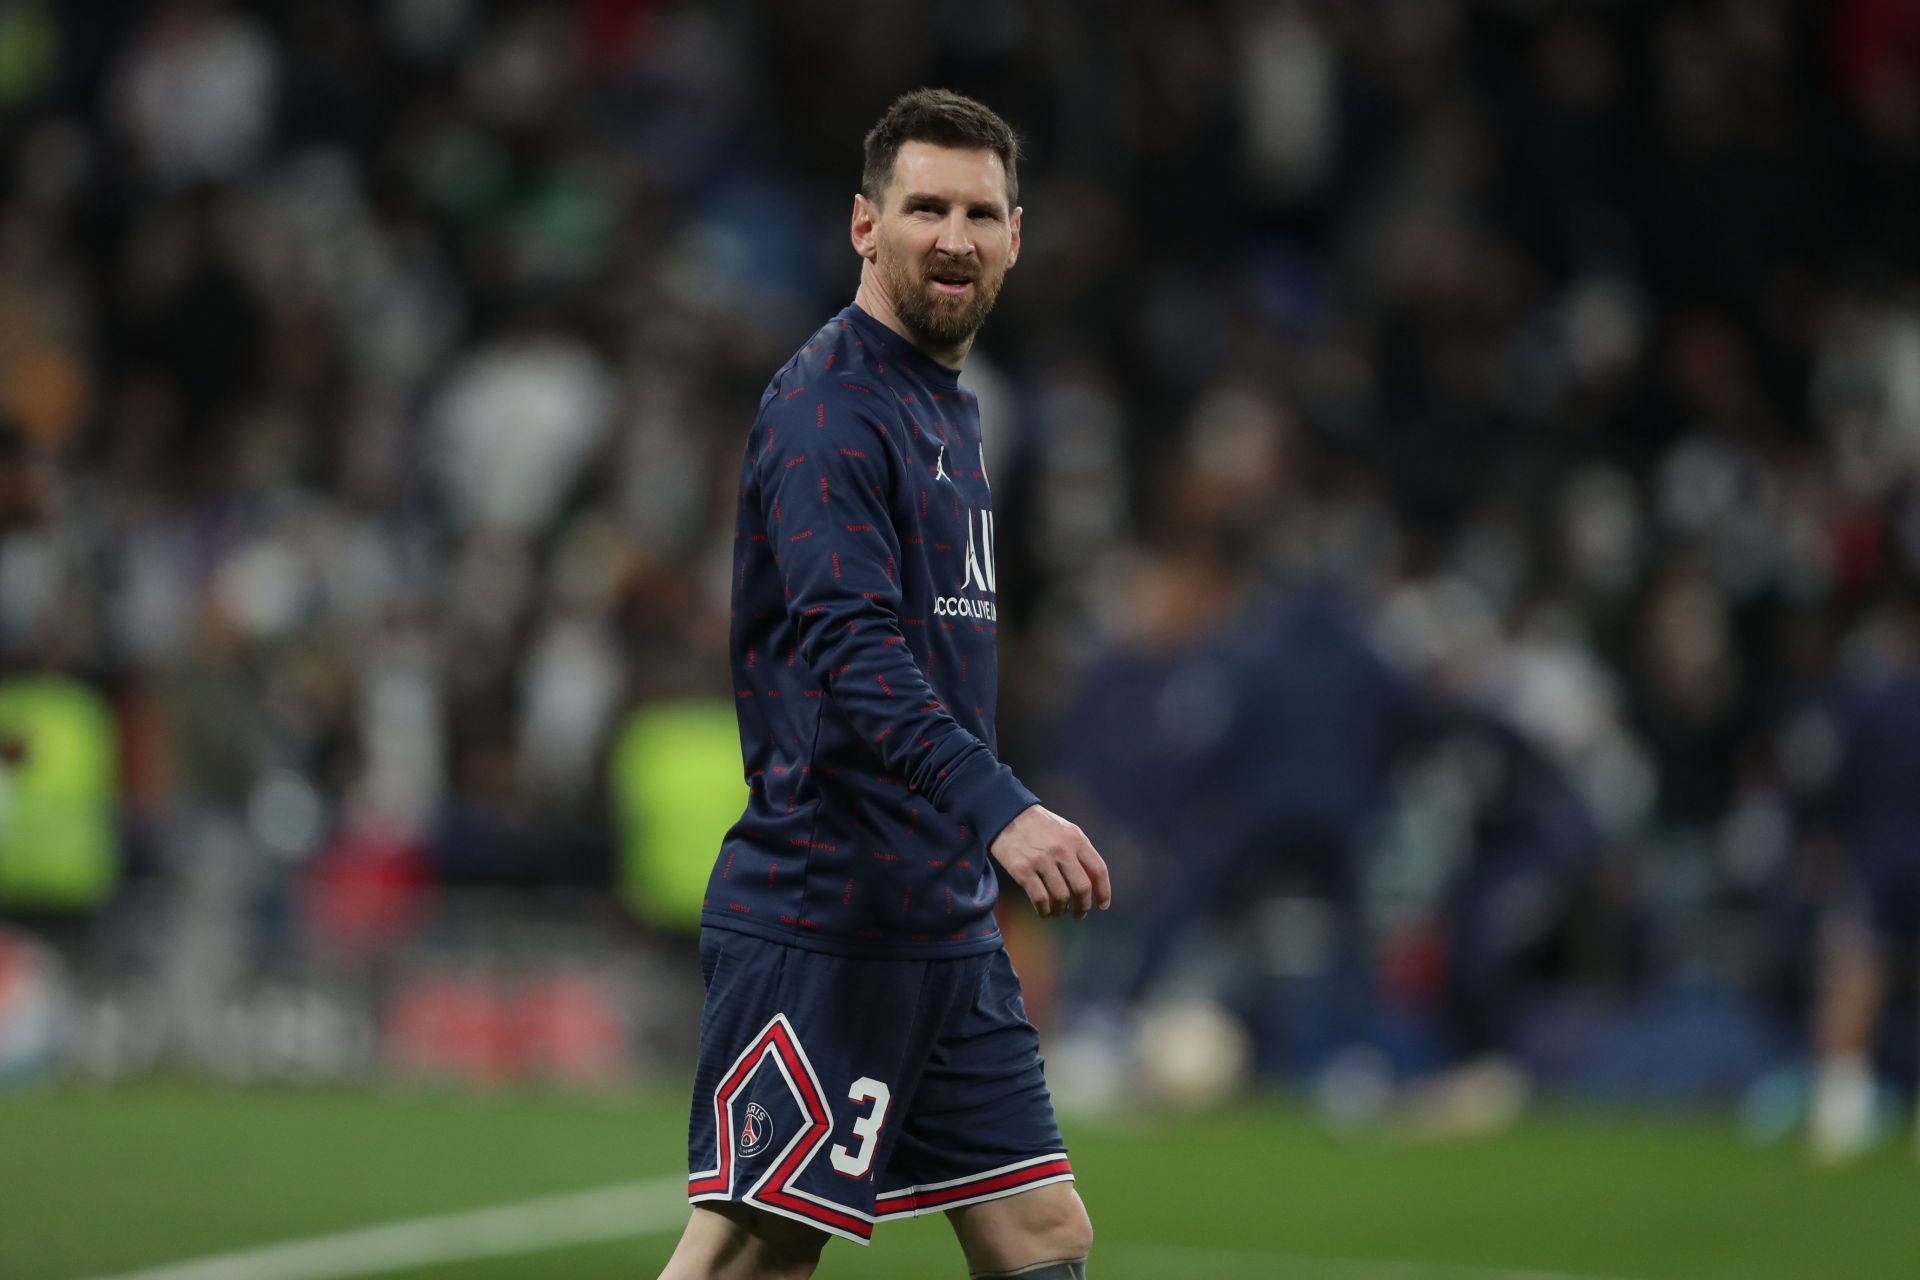 Lionel Messi has failed to get going at PSG so far.